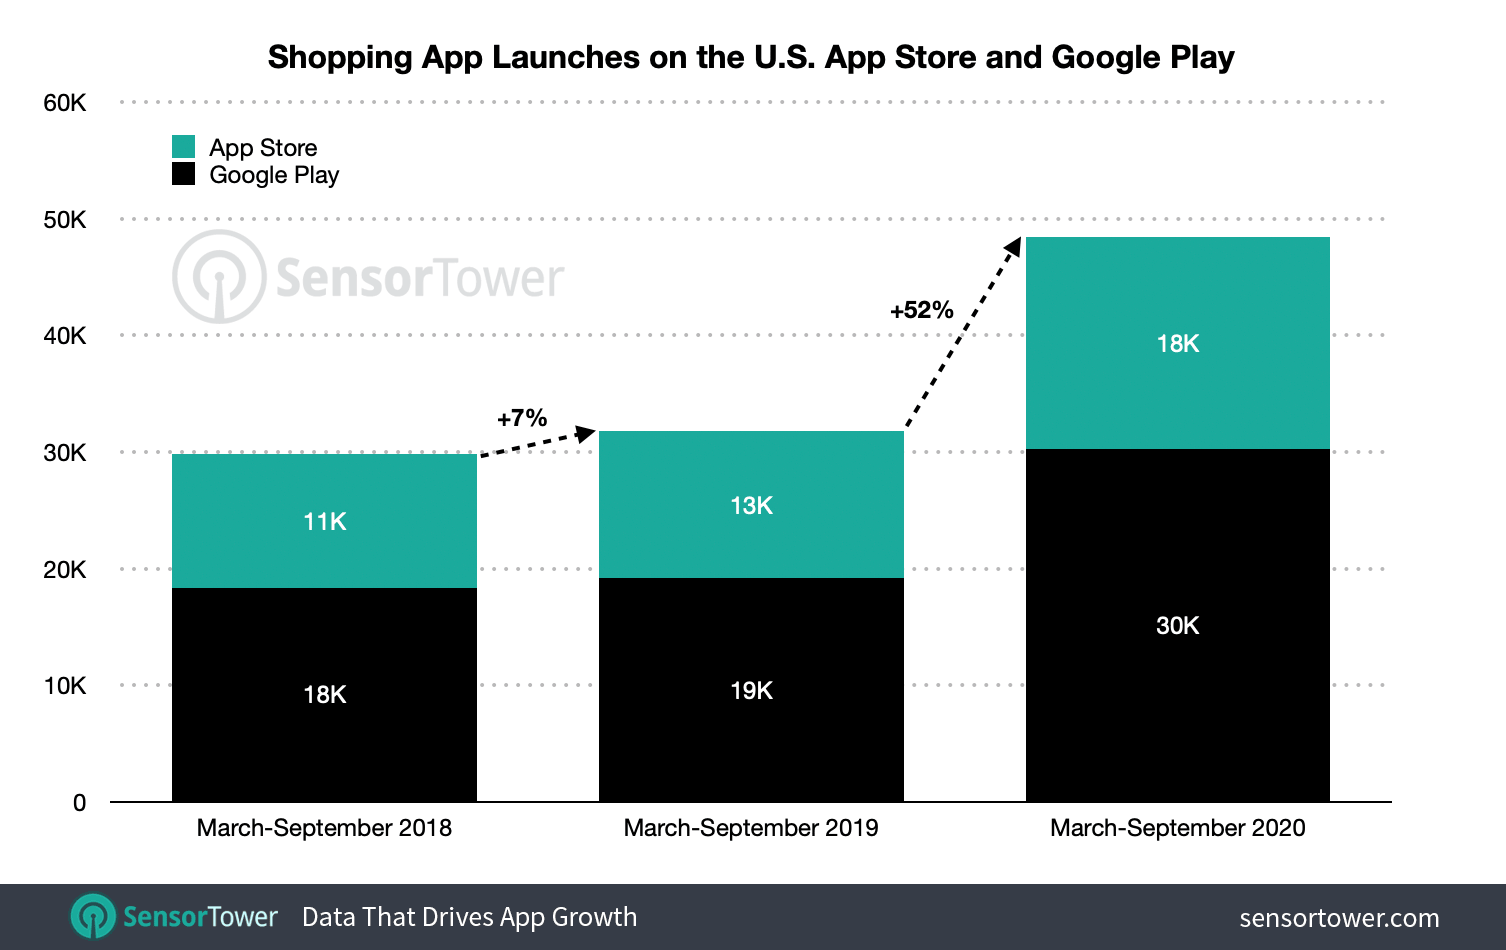 New apps launched in the Shopping category from March to September grew 52% year-over-year on the U.S. App Store and Google Play